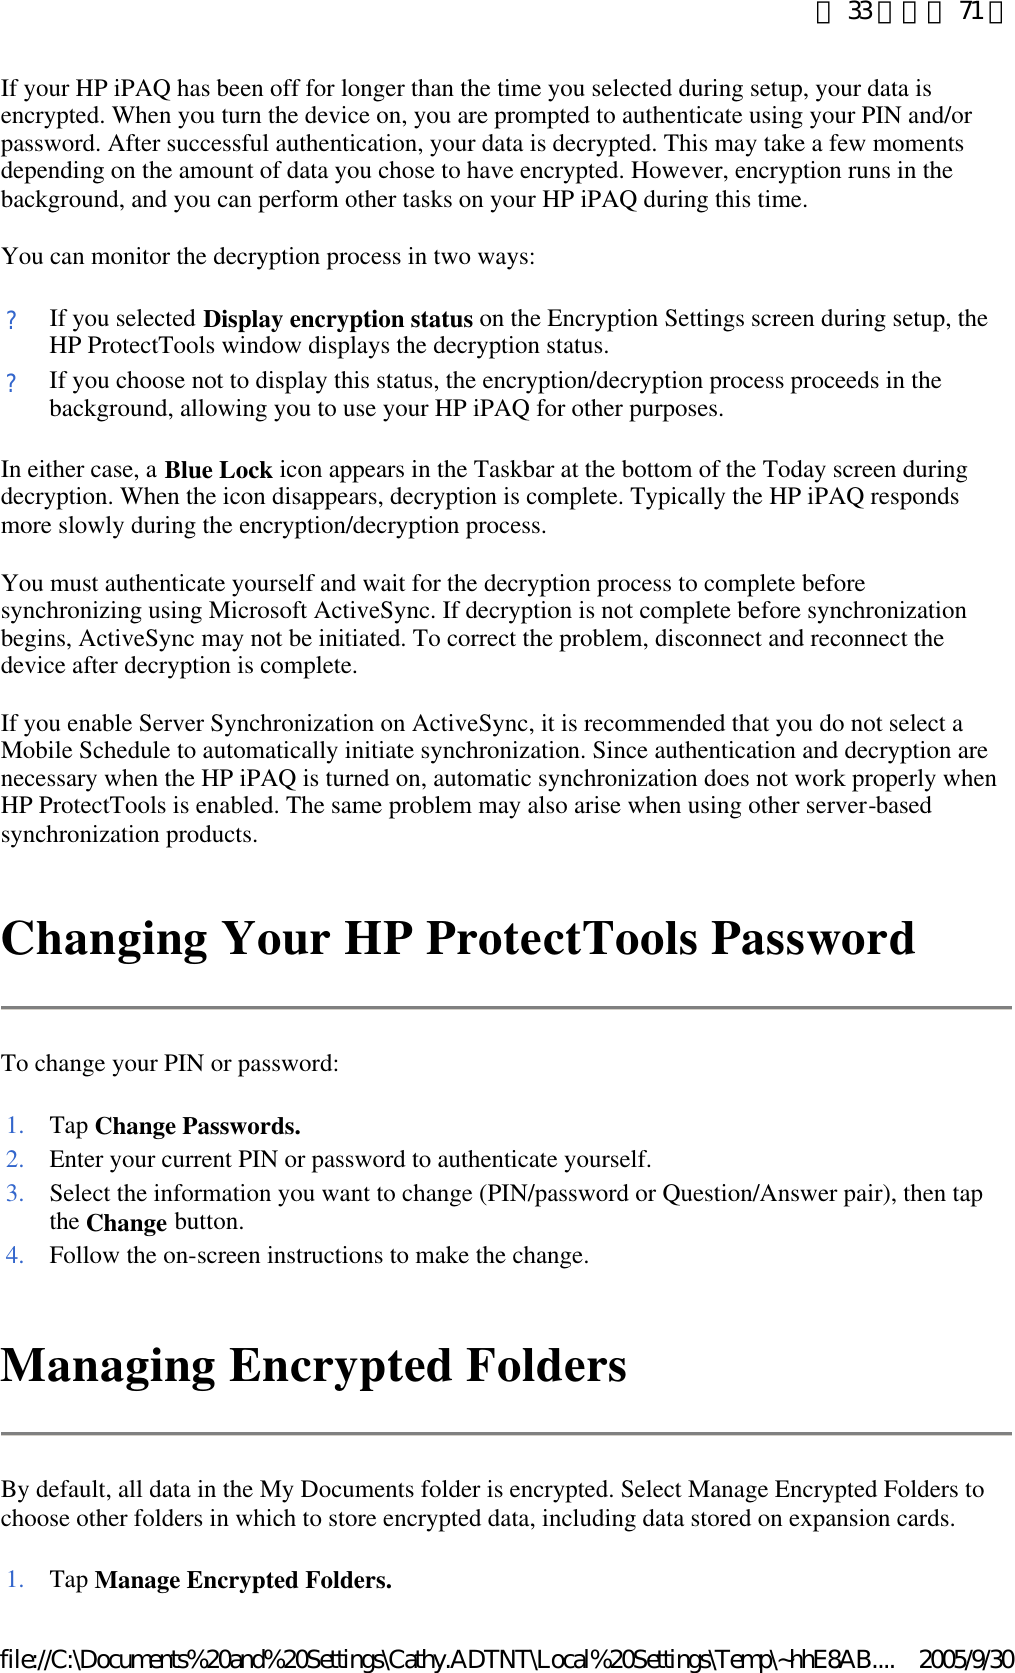 If your HP iPAQ has been off for longer than the time you selected during setup, your data is encrypted. When you turn the device on, you are prompted to authenticate using your PIN and/or password. After successful authentication, your data is decrypted. This may take a few moments depending on the amount of data you chose to have encrypted. However, encryption runs in the background, and you can perform other tasks on your HP iPAQ during this time.  You can monitor the decryption process in two ways: In either case, a Blue Lock icon appears in the Taskbar at the bottom of the Today screen during decryption. When the icon disappears, decryption is complete. Typically the HP iPAQ responds more slowly during the encryption/decryption process.  You must authenticate yourself and wait for the decryption process to complete before synchronizing using Microsoft ActiveSync. If decryption is not complete before synchronization begins, ActiveSync may not be initiated. To correct the problem, disconnect and reconnect the device after decryption is complete.  If you enable Server Synchronization on ActiveSync, it is recommended that you do not select a Mobile Schedule to automatically initiate synchronization. Since authentication and decryption are necessary when the HP iPAQ is turned on, automatic synchronization does not work properly when HP ProtectTools is enabled. The same problem may also arise when using other server-based synchronization products.  Changing Your HP ProtectTools Password To change your PIN or password: Managing Encrypted Folders By default, all data in the My Documents folder is encrypted. Select Manage Encrypted Folders to choose other folders in which to store encrypted data, including data stored on expansion cards.  ?If you selected Display encryption status on the Encryption Settings screen during setup, the HP ProtectTools window displays the decryption status. ?If you choose not to display this status, the encryption/decryption process proceeds in the background, allowing you to use your HP iPAQ for other purposes. 1. Tap Change Passwords.2. Enter your current PIN or password to authenticate yourself.3. Select the information you want to change (PIN/password or Question/Answer pair), then tap the Change button. 4. Follow the on-screen instructions to make the change. 1. Tap Manage Encrypted Folders.第 33 頁，共 71 頁2005/9/30file://C:\Documents%20and%20Settings\Cathy.ADTNT\Local%20Settings\Temp\~hhE8AB....